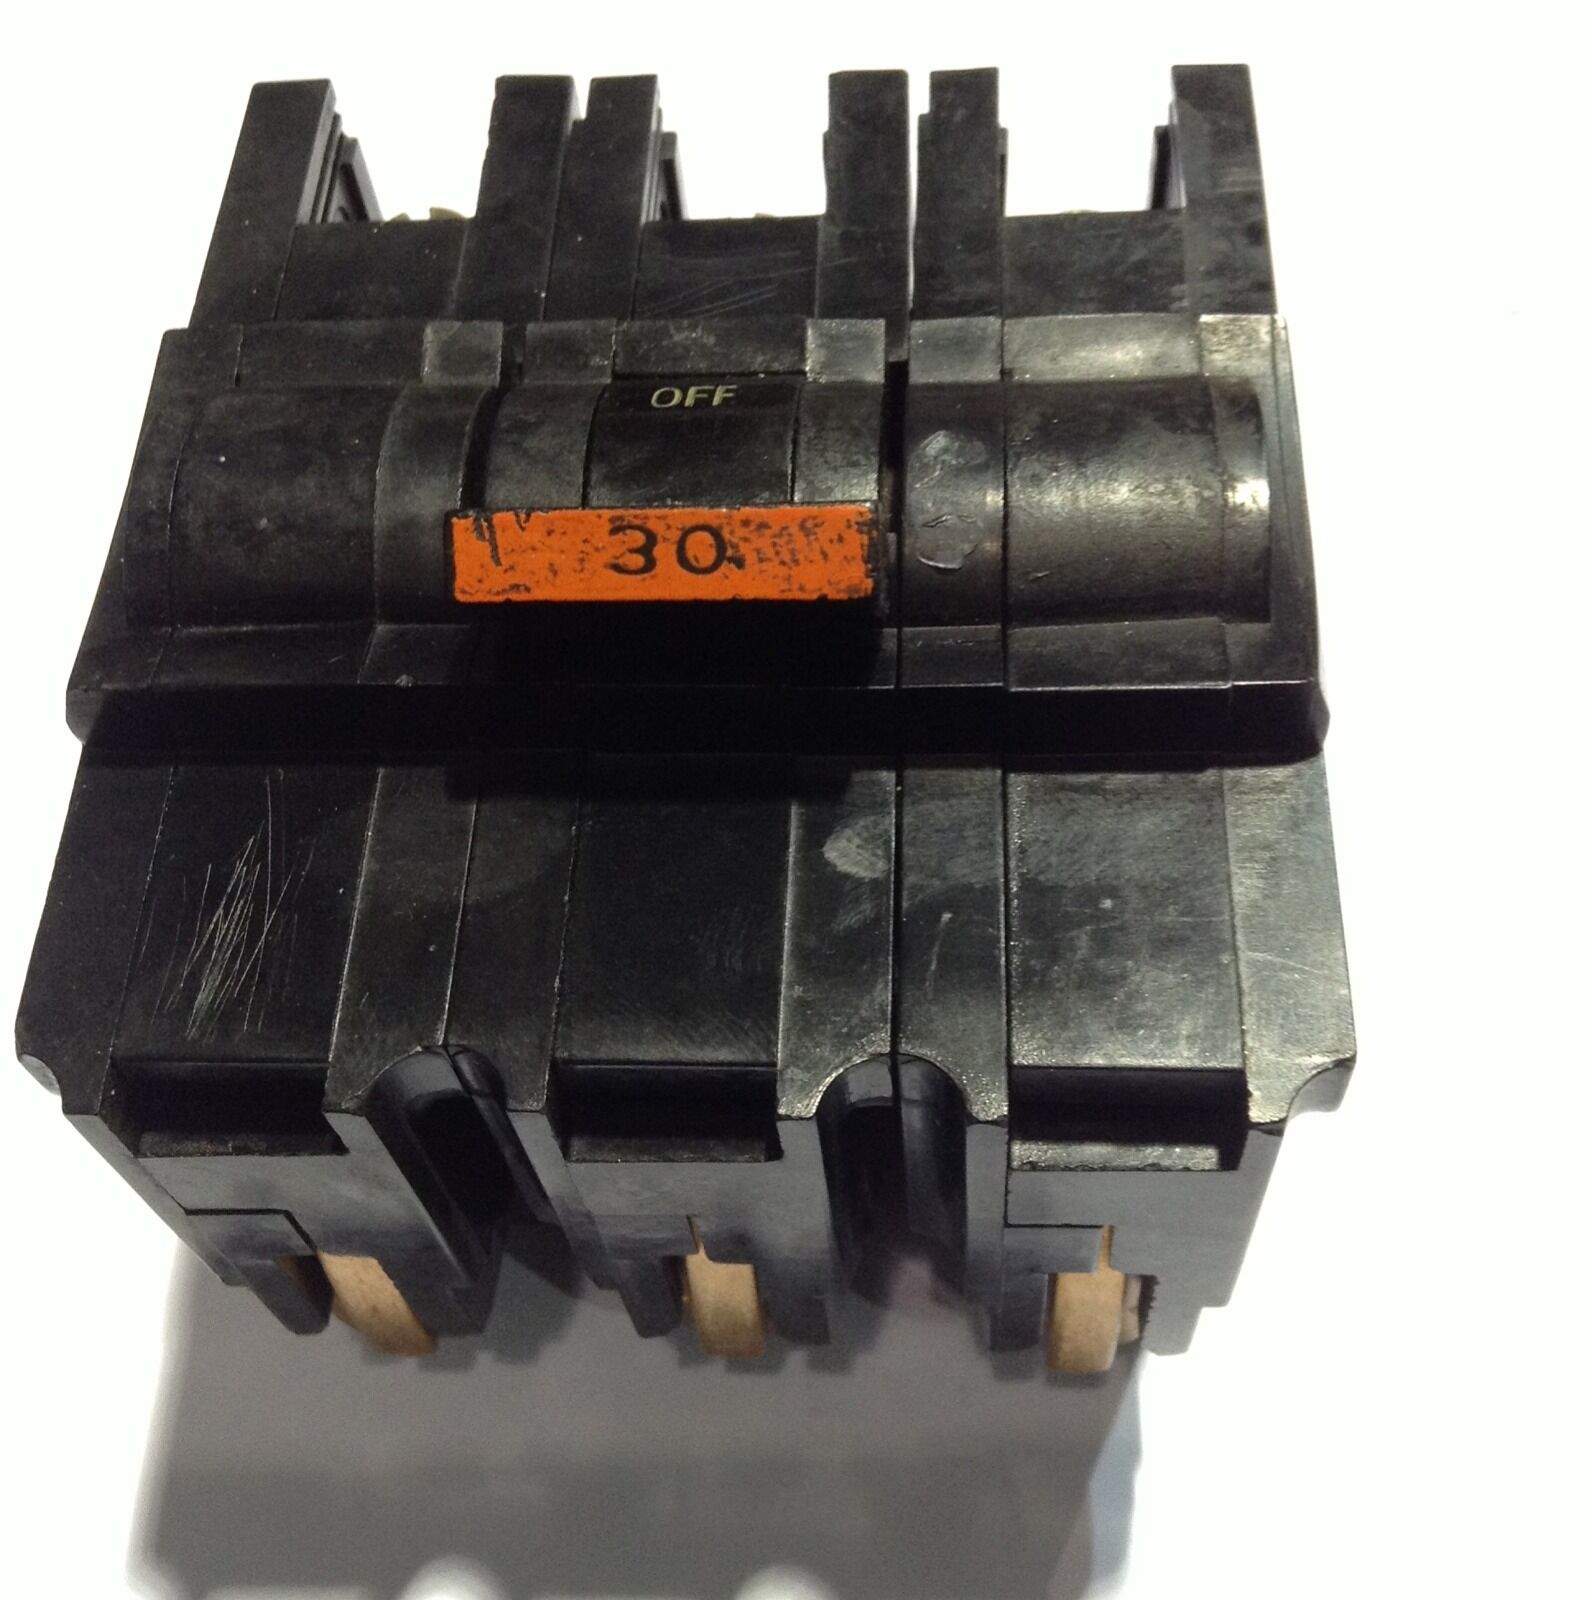 FPE FEDERAL PACIFIC ELECTRIC 3P30 CIRCUIT BREAKER 30A 3P